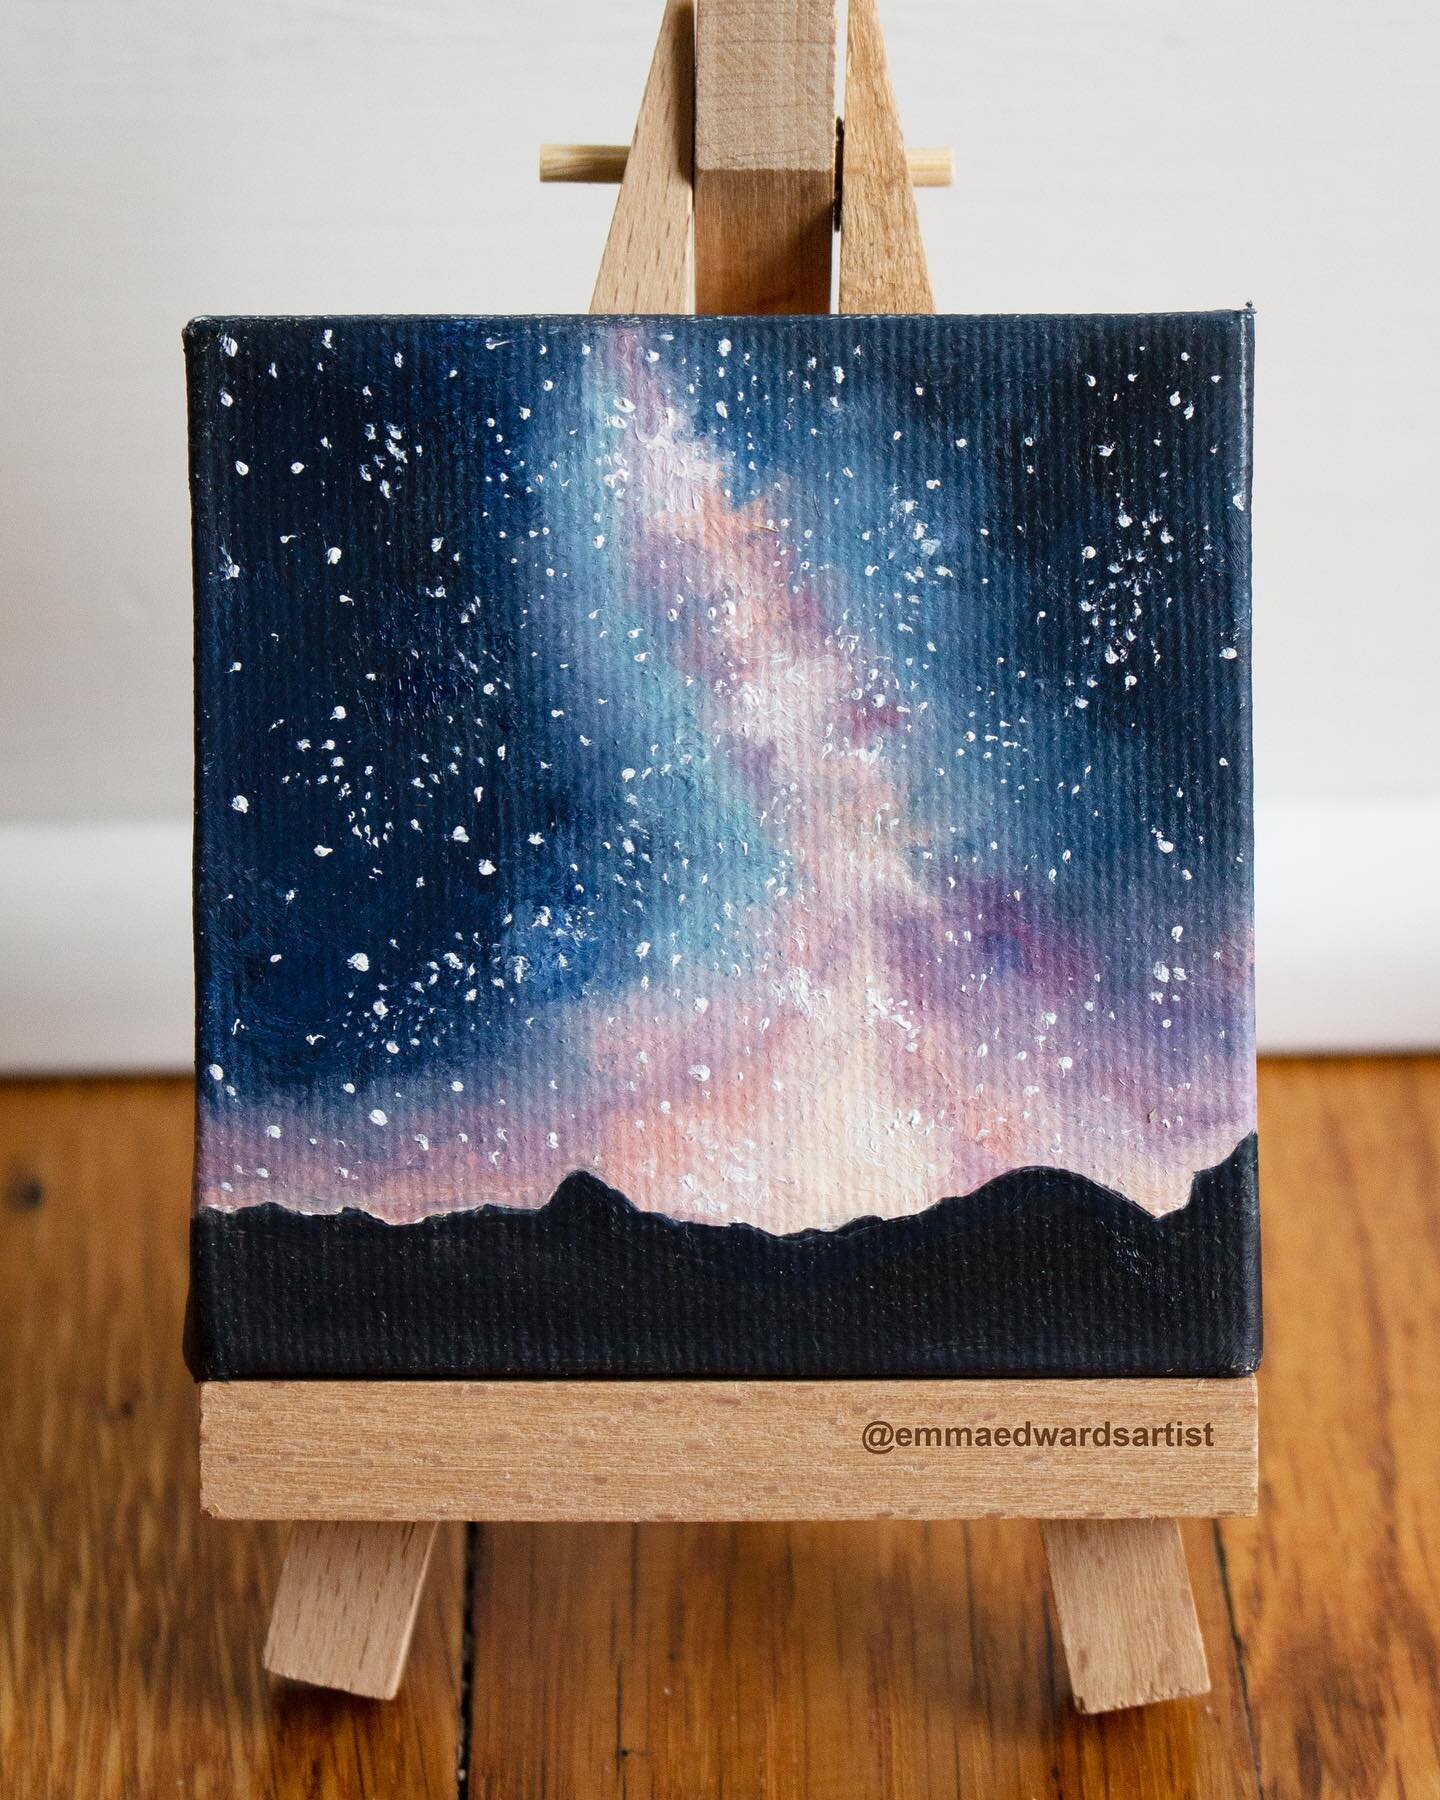 This year I painted my first nighttime scene as a commission. It was surprisingly simple to blend colors together for a colorful night sky. I thought I would try it again on a smaller canvas with pink and blue. 
.
.
.
.
.
.

#oilpainting  #minipainti